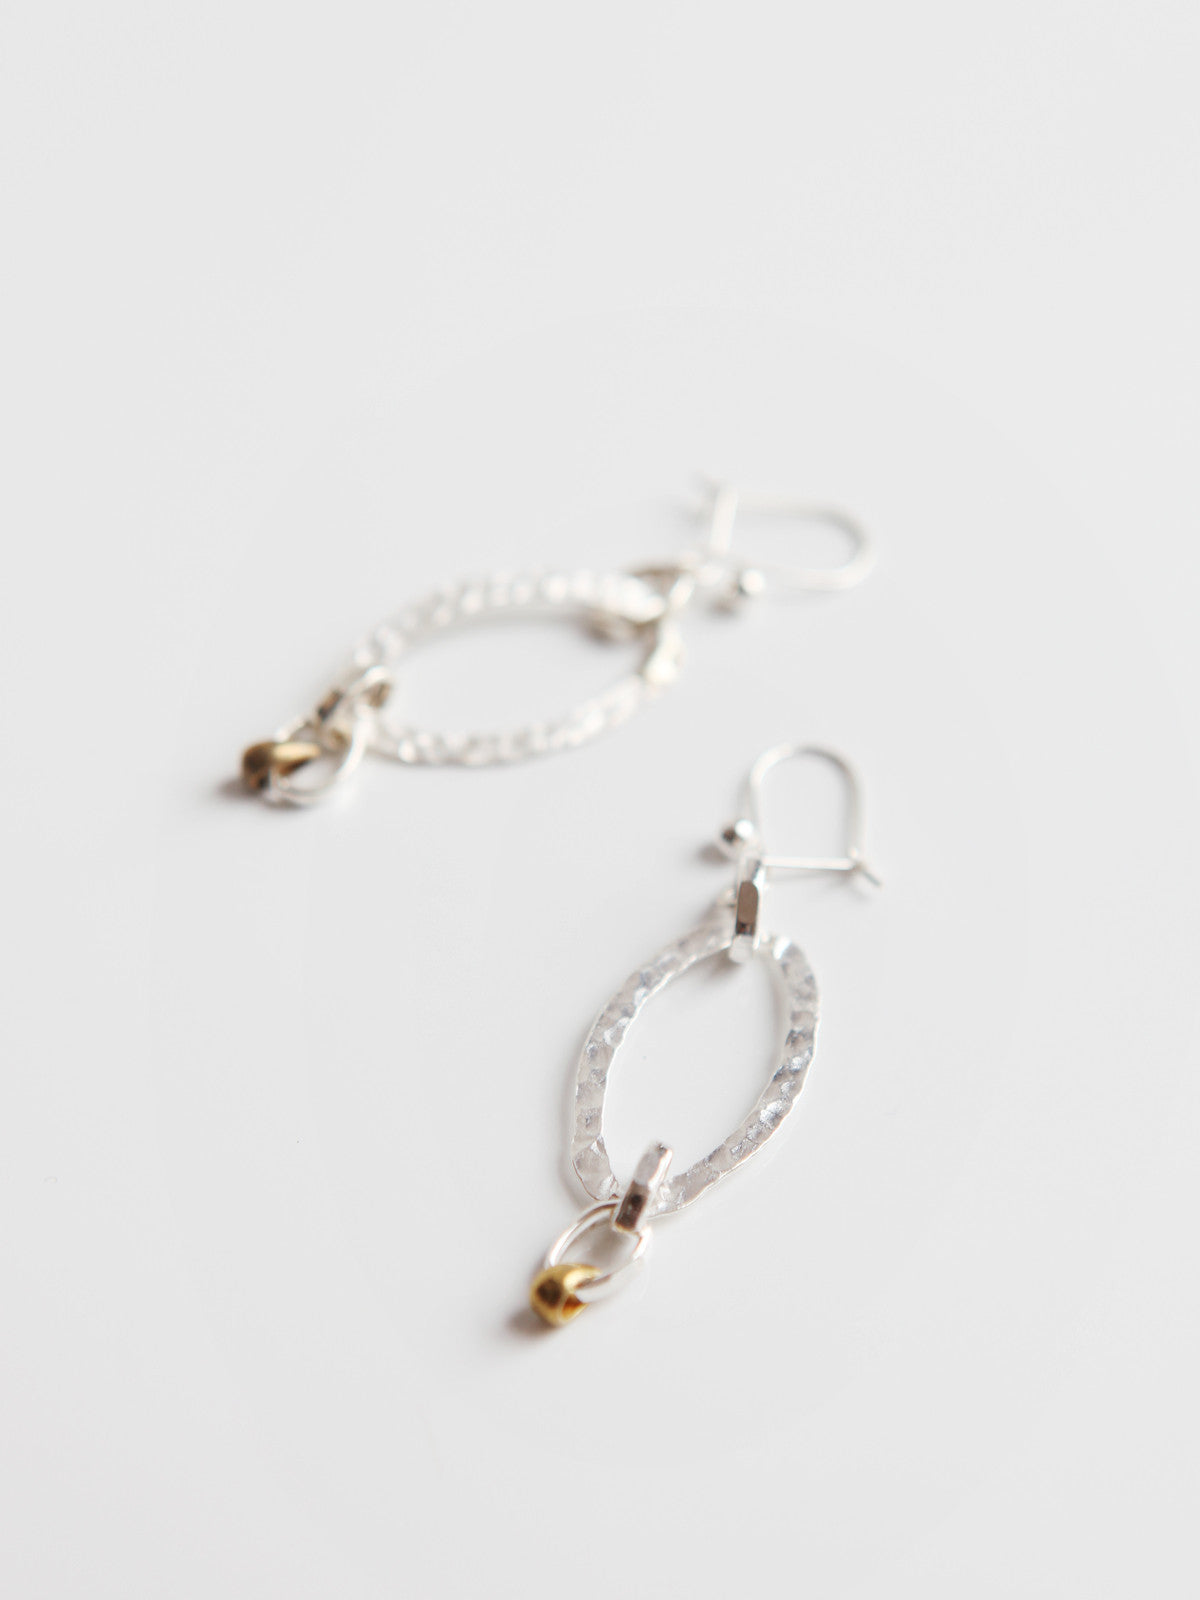 ORNAMENT & CRIME SILVER HAMMERED O EARRINGS